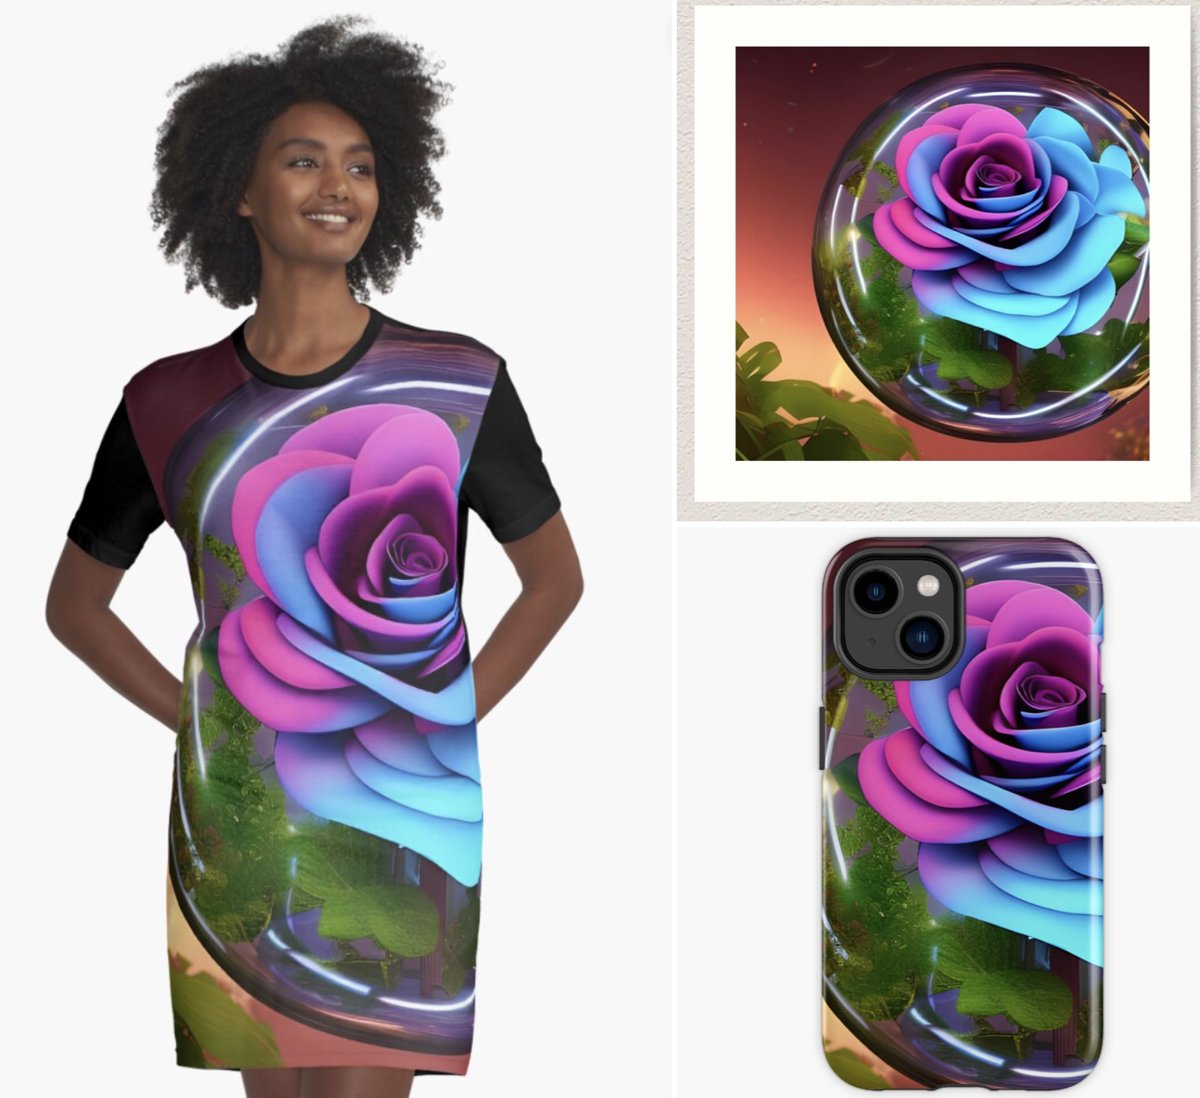 <Magical Rose Ball> #AICreation on #ArtPrint #Dress #iPhoneCase on my #redbubble shop

redbubble.com/shop/ap/147386…

#AI #AIart #AIartist #digitalart #giftforher  #womenclothes #homedecor #rosepattern #flowerpattern #magicalball #androidcase #blanket #babyandkids #bedandbath #bag